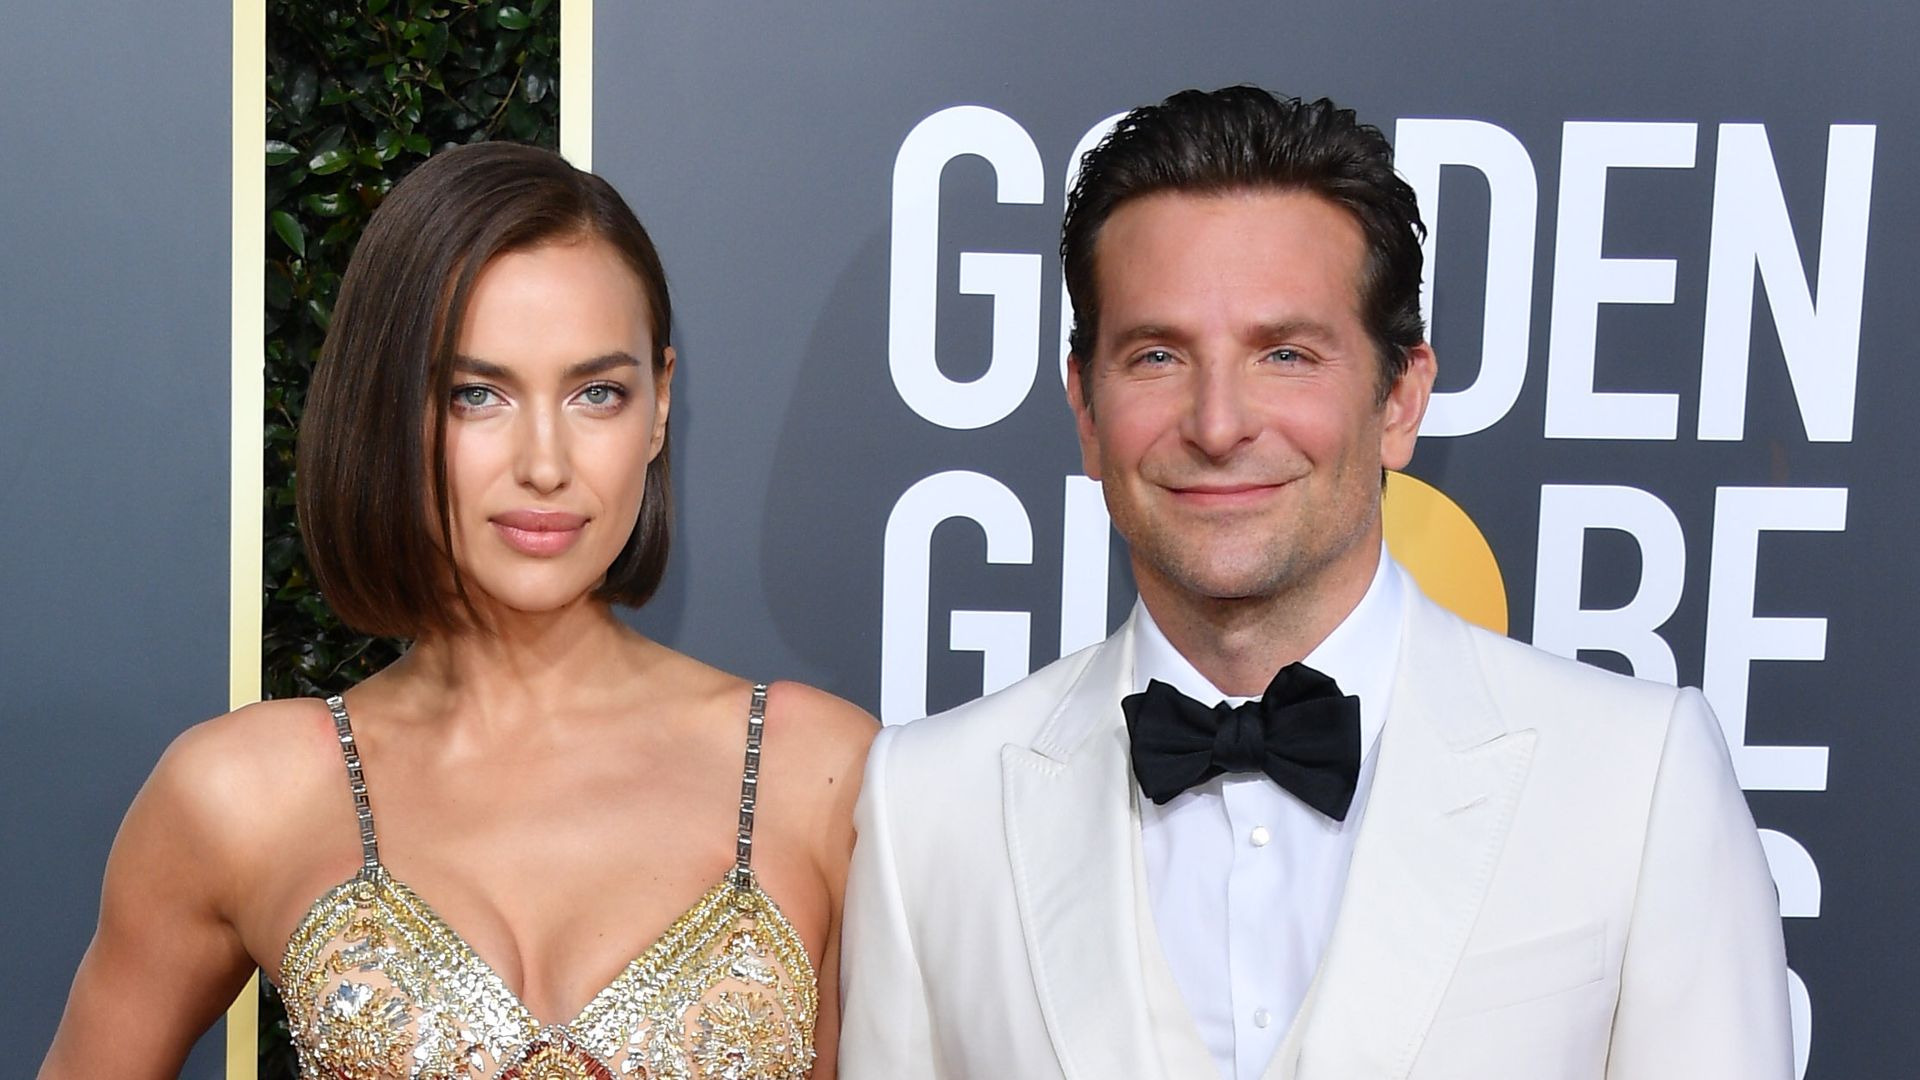 Irina Shayk and Bradley Cooper attend the 76th Annual Golden Globe Awards held at The Beverly Hilton Hotel on January 06, 2019 in Beverly Hills, California